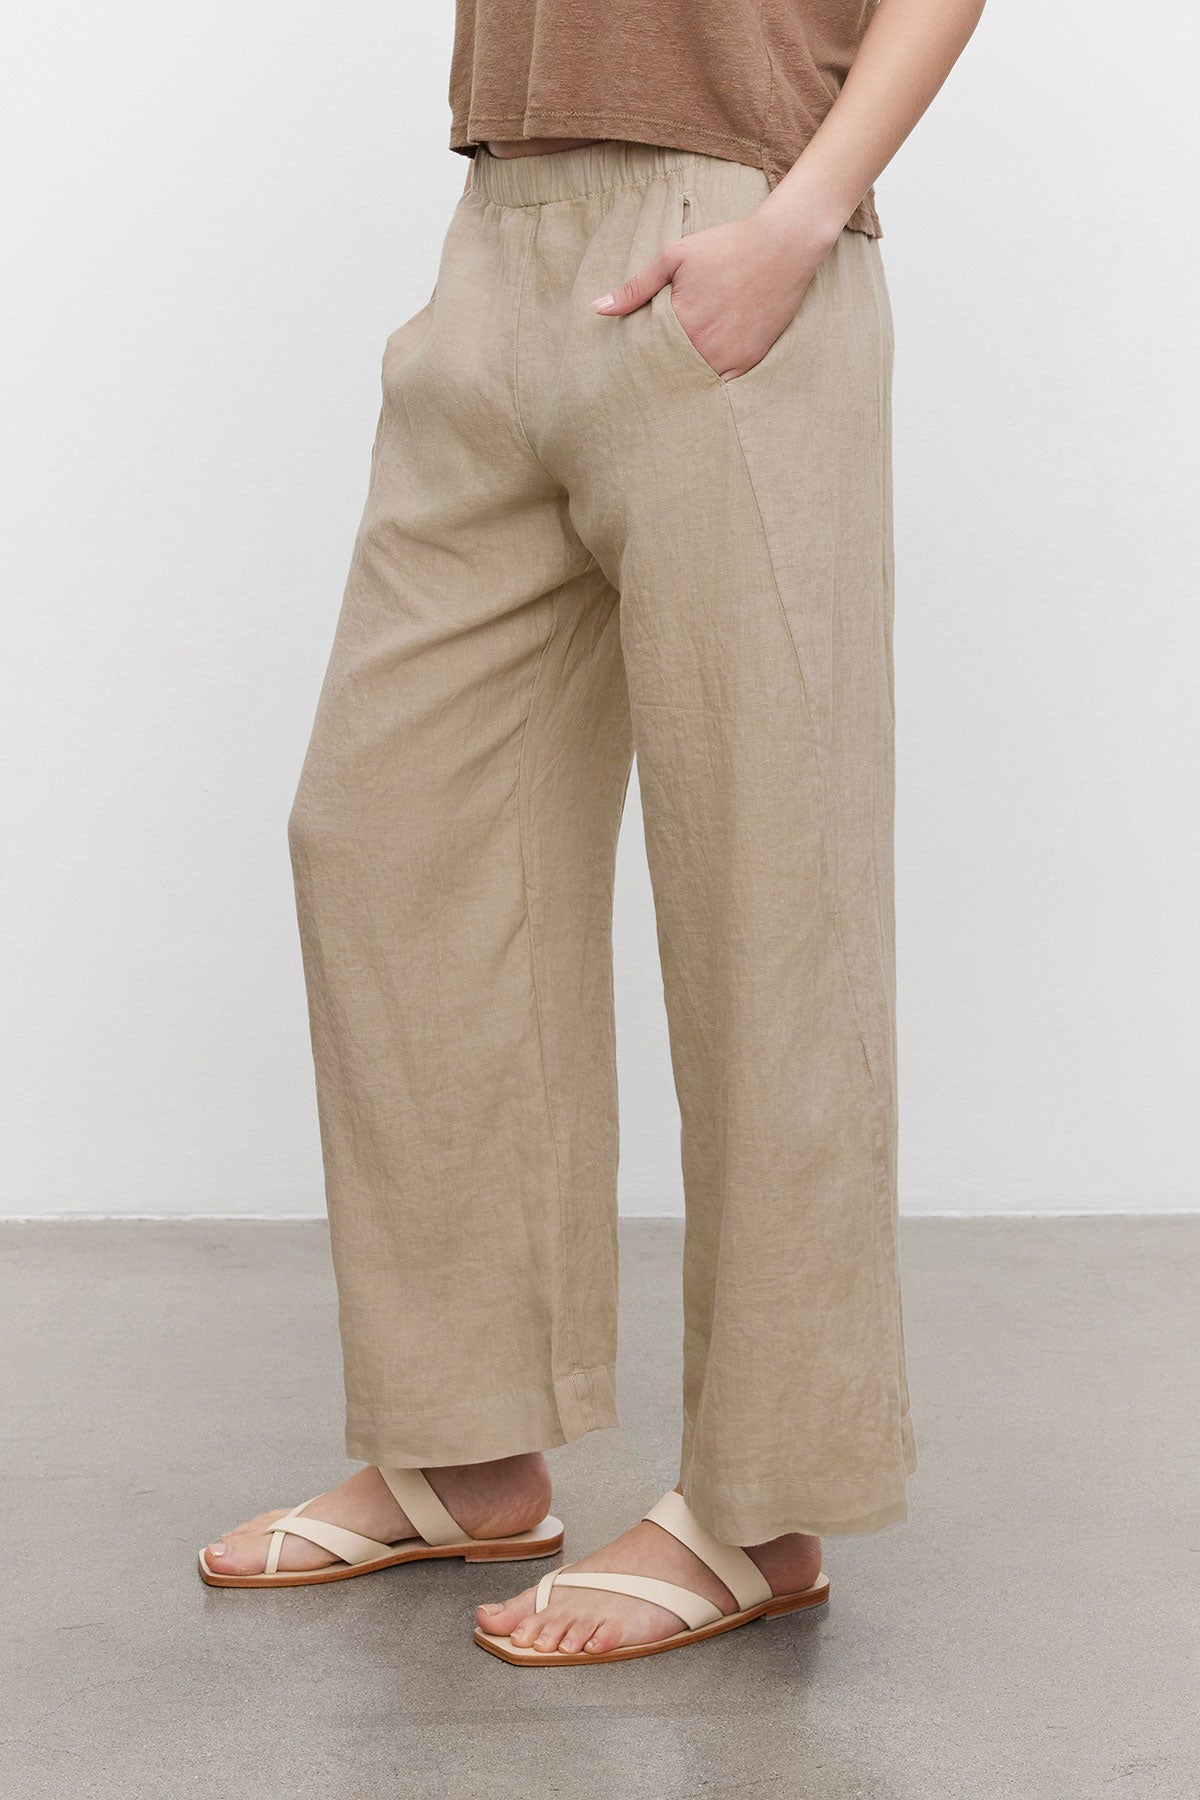   Person standing in a neutral pose wearing Velvet by Graham & Spencer's LOLA LINEN PANT and white sandals on a plain background. 